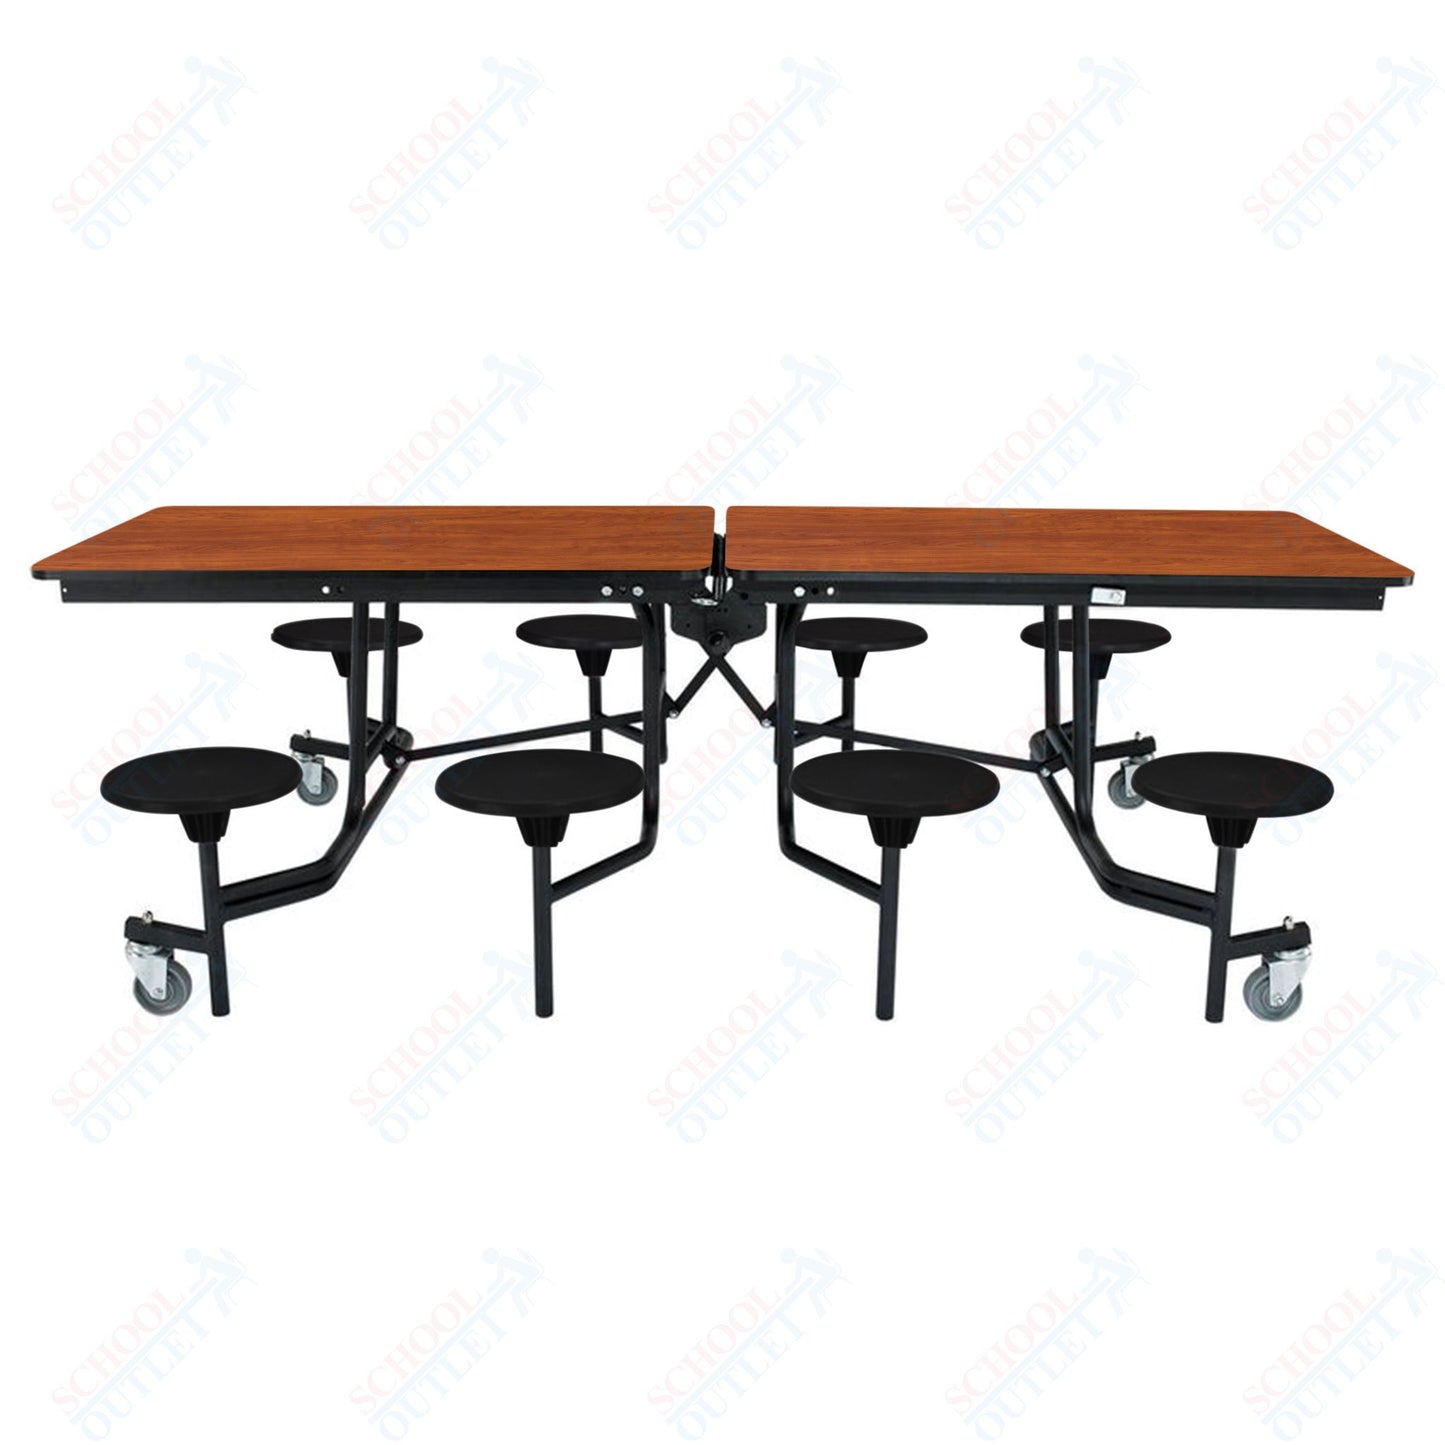 NPS Mobile Cafeteria Table - 30" W x 8' L - 8 Stools - Plywood Core - T-Molding Edge - Chrome Frame